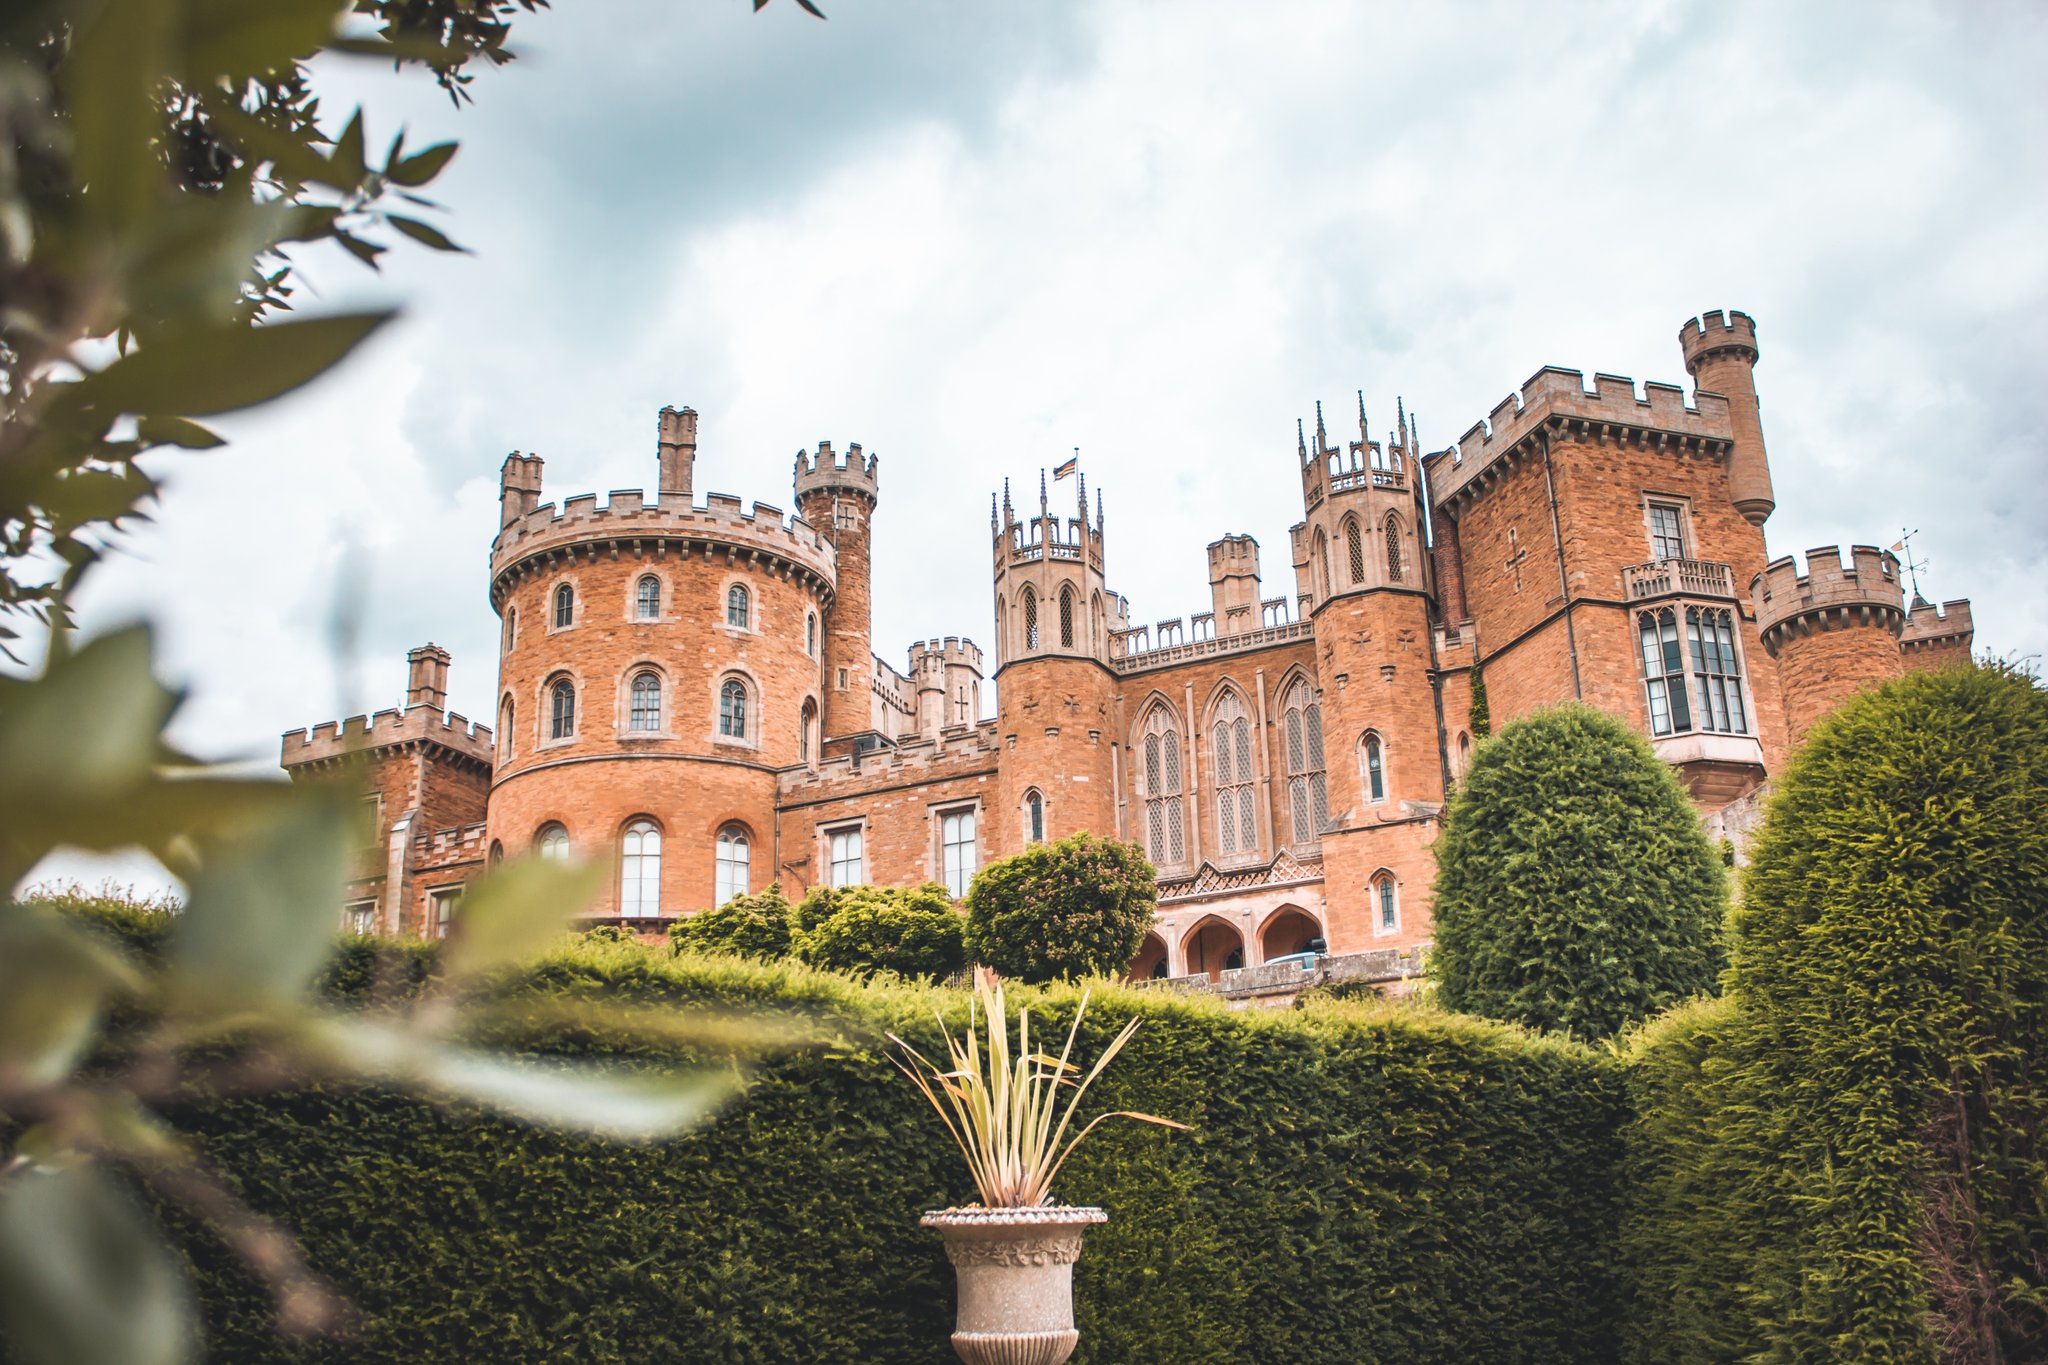 General 2048x1365 castle architecture old building leaves England UK